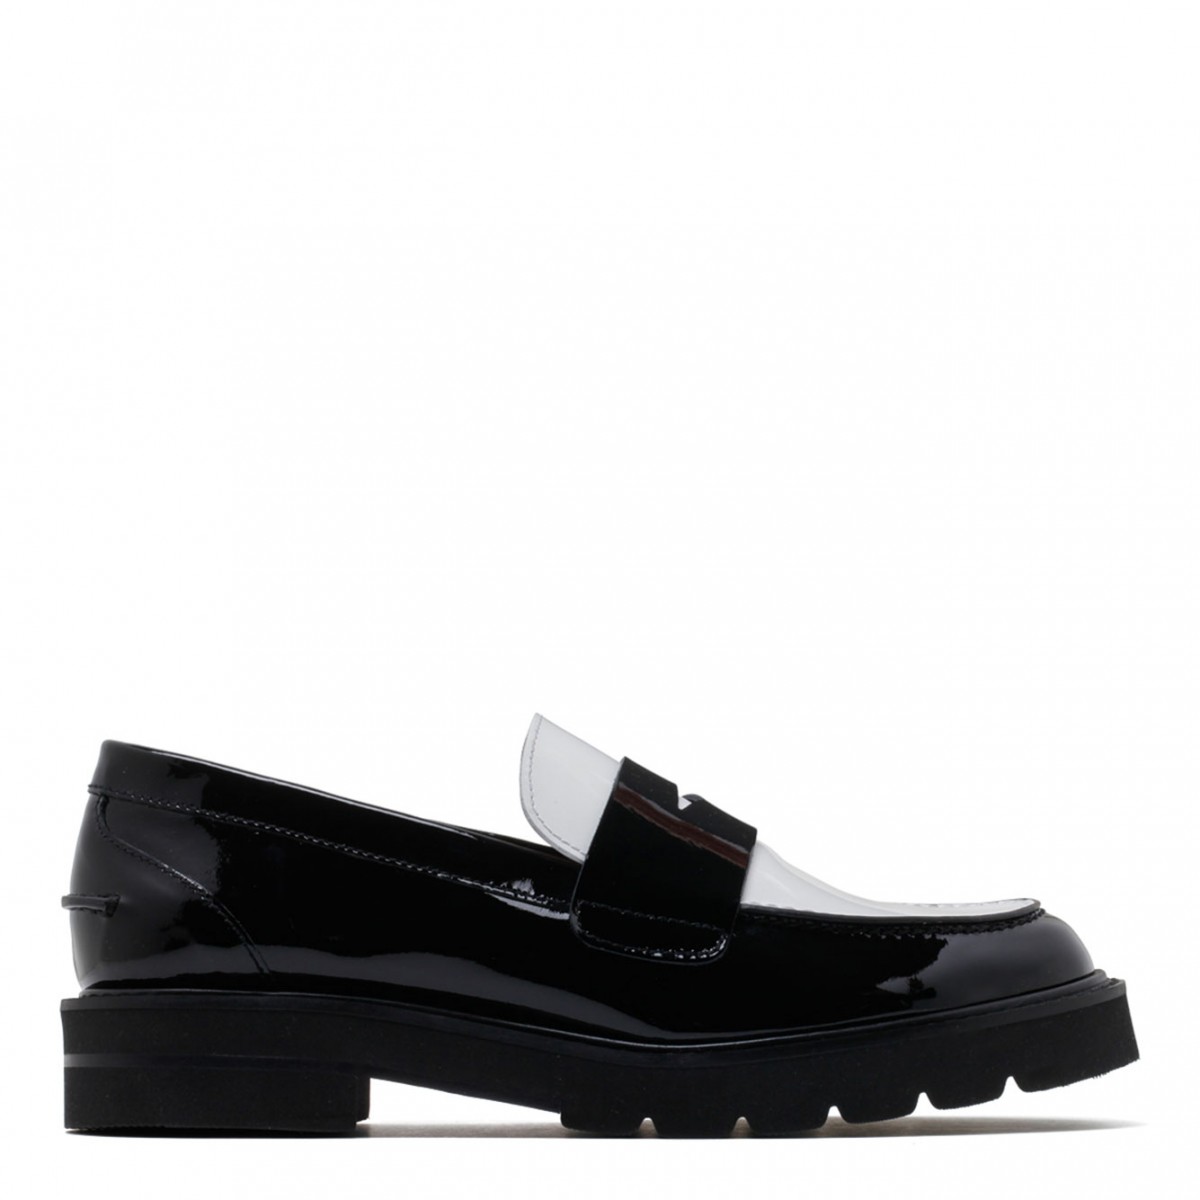 Black and White Leather Penny Loafers